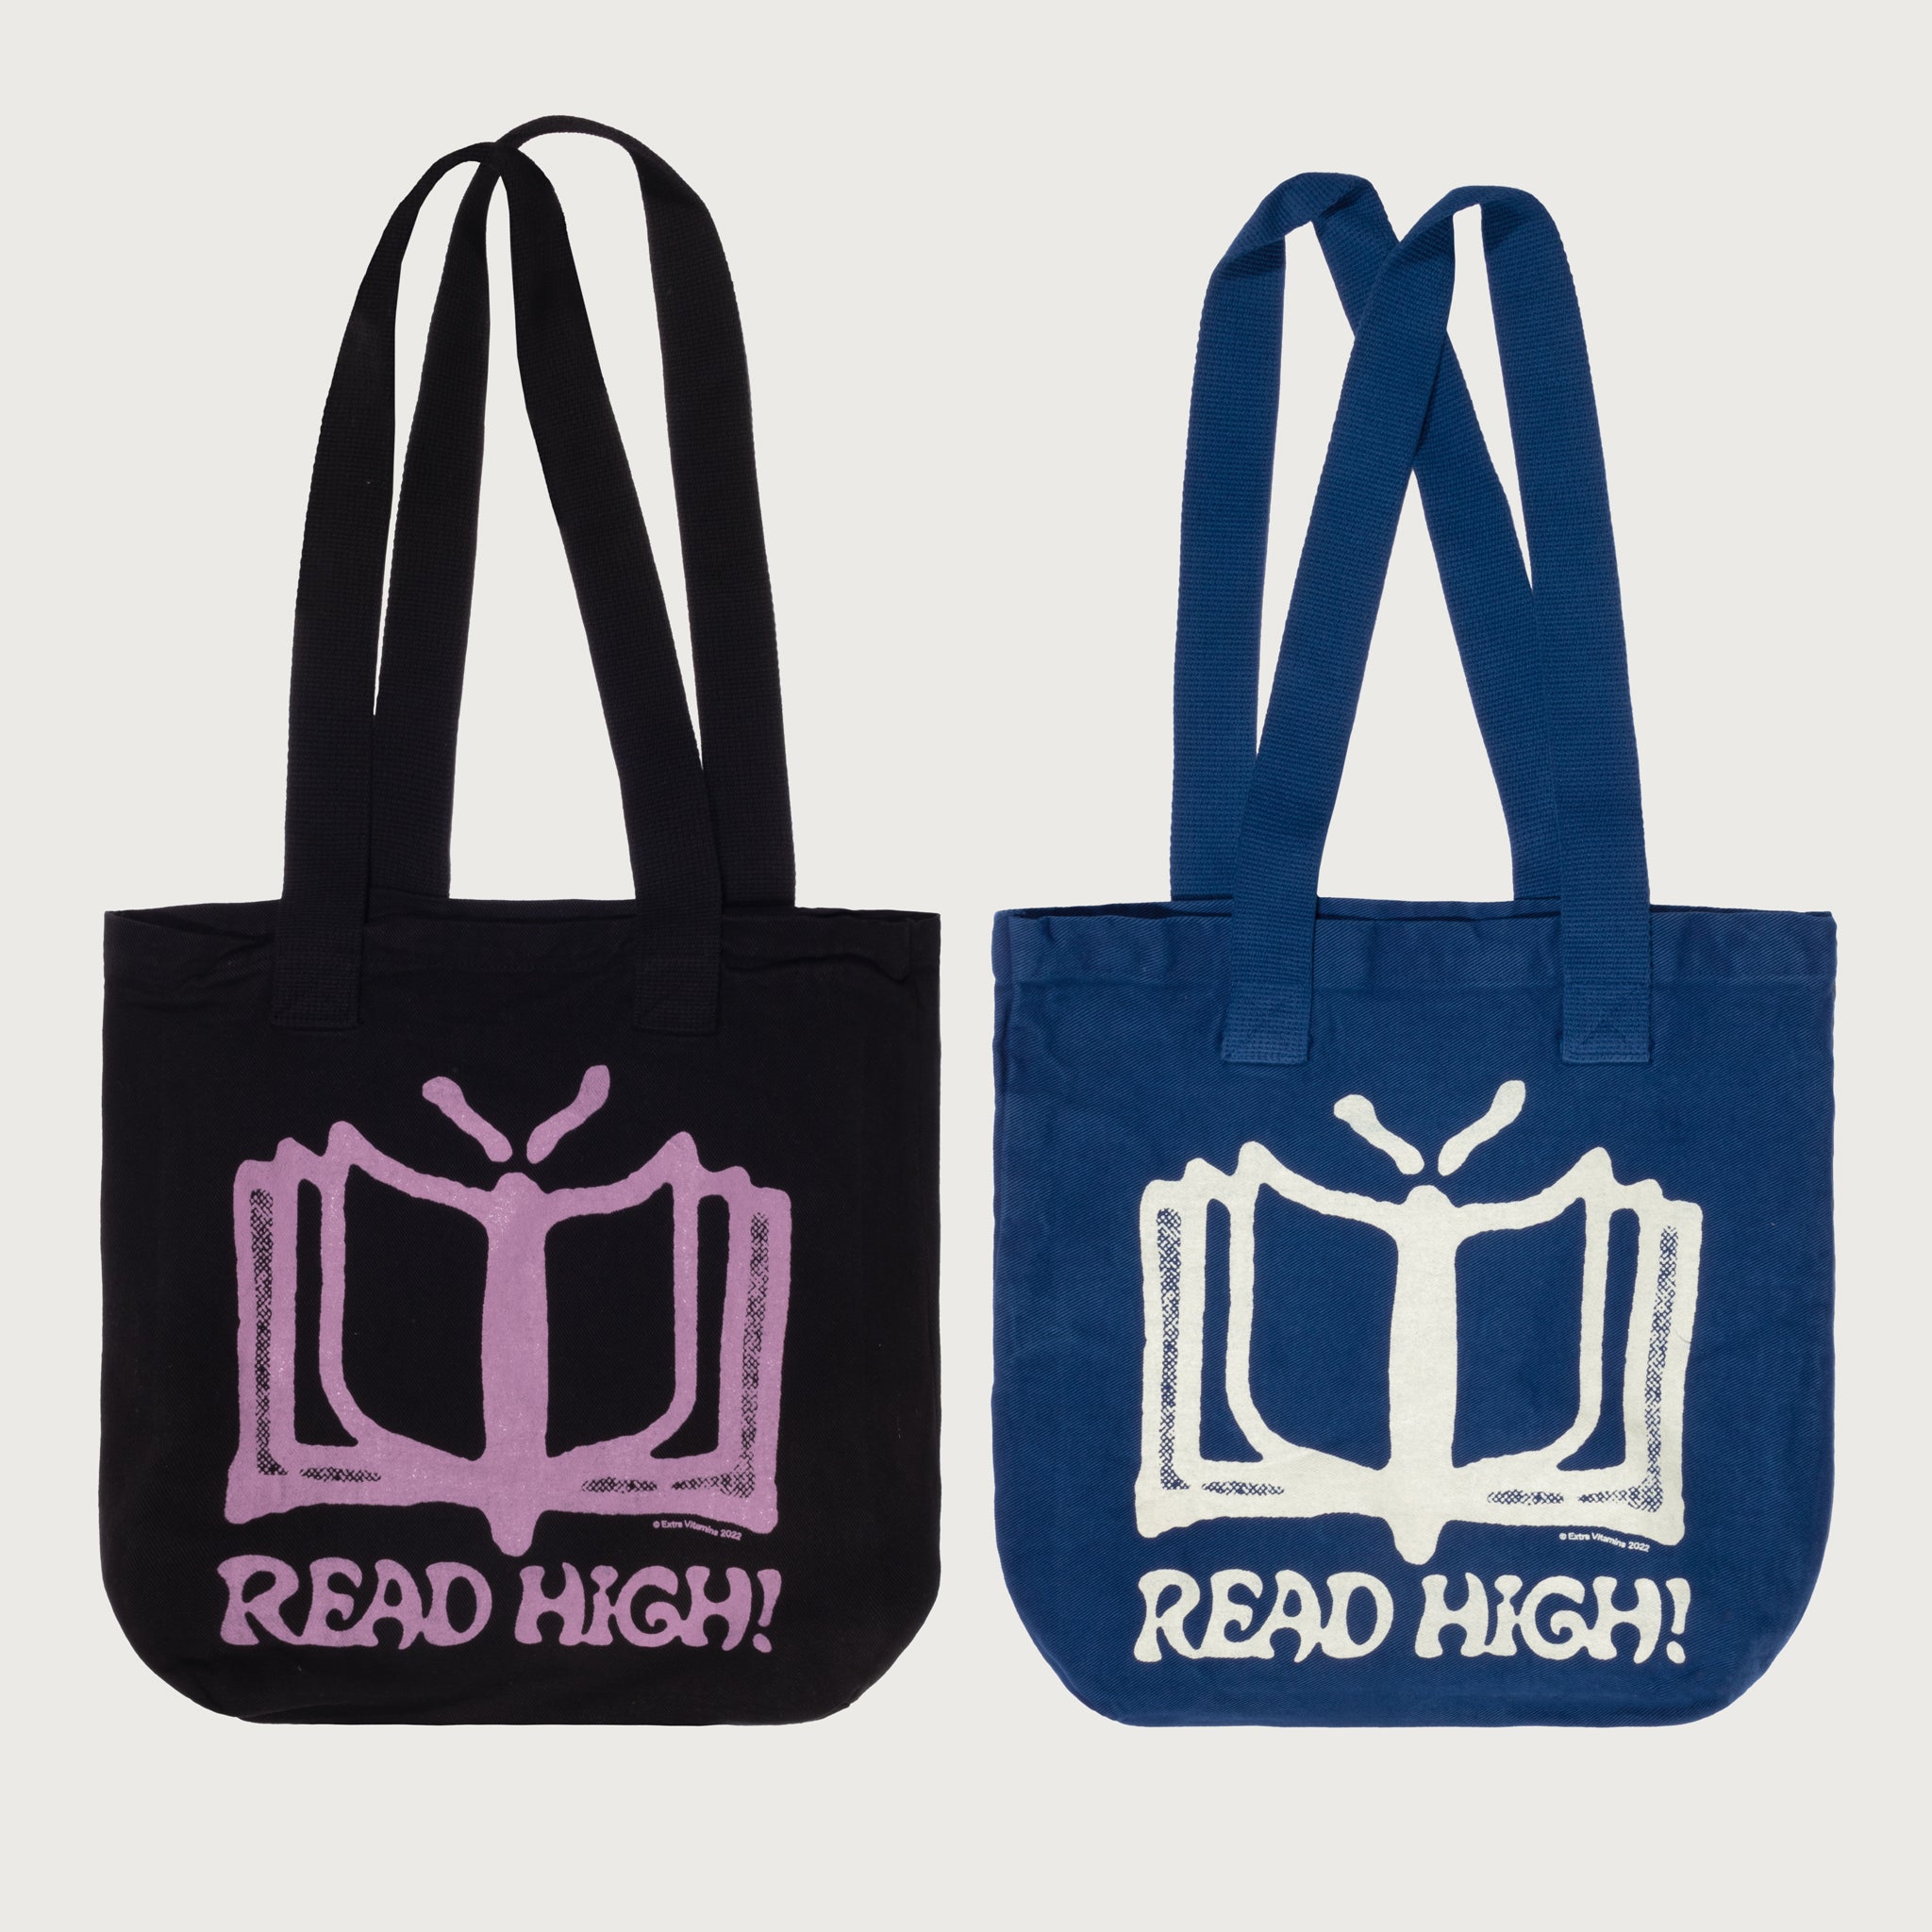 READ HIGH butterfly tote